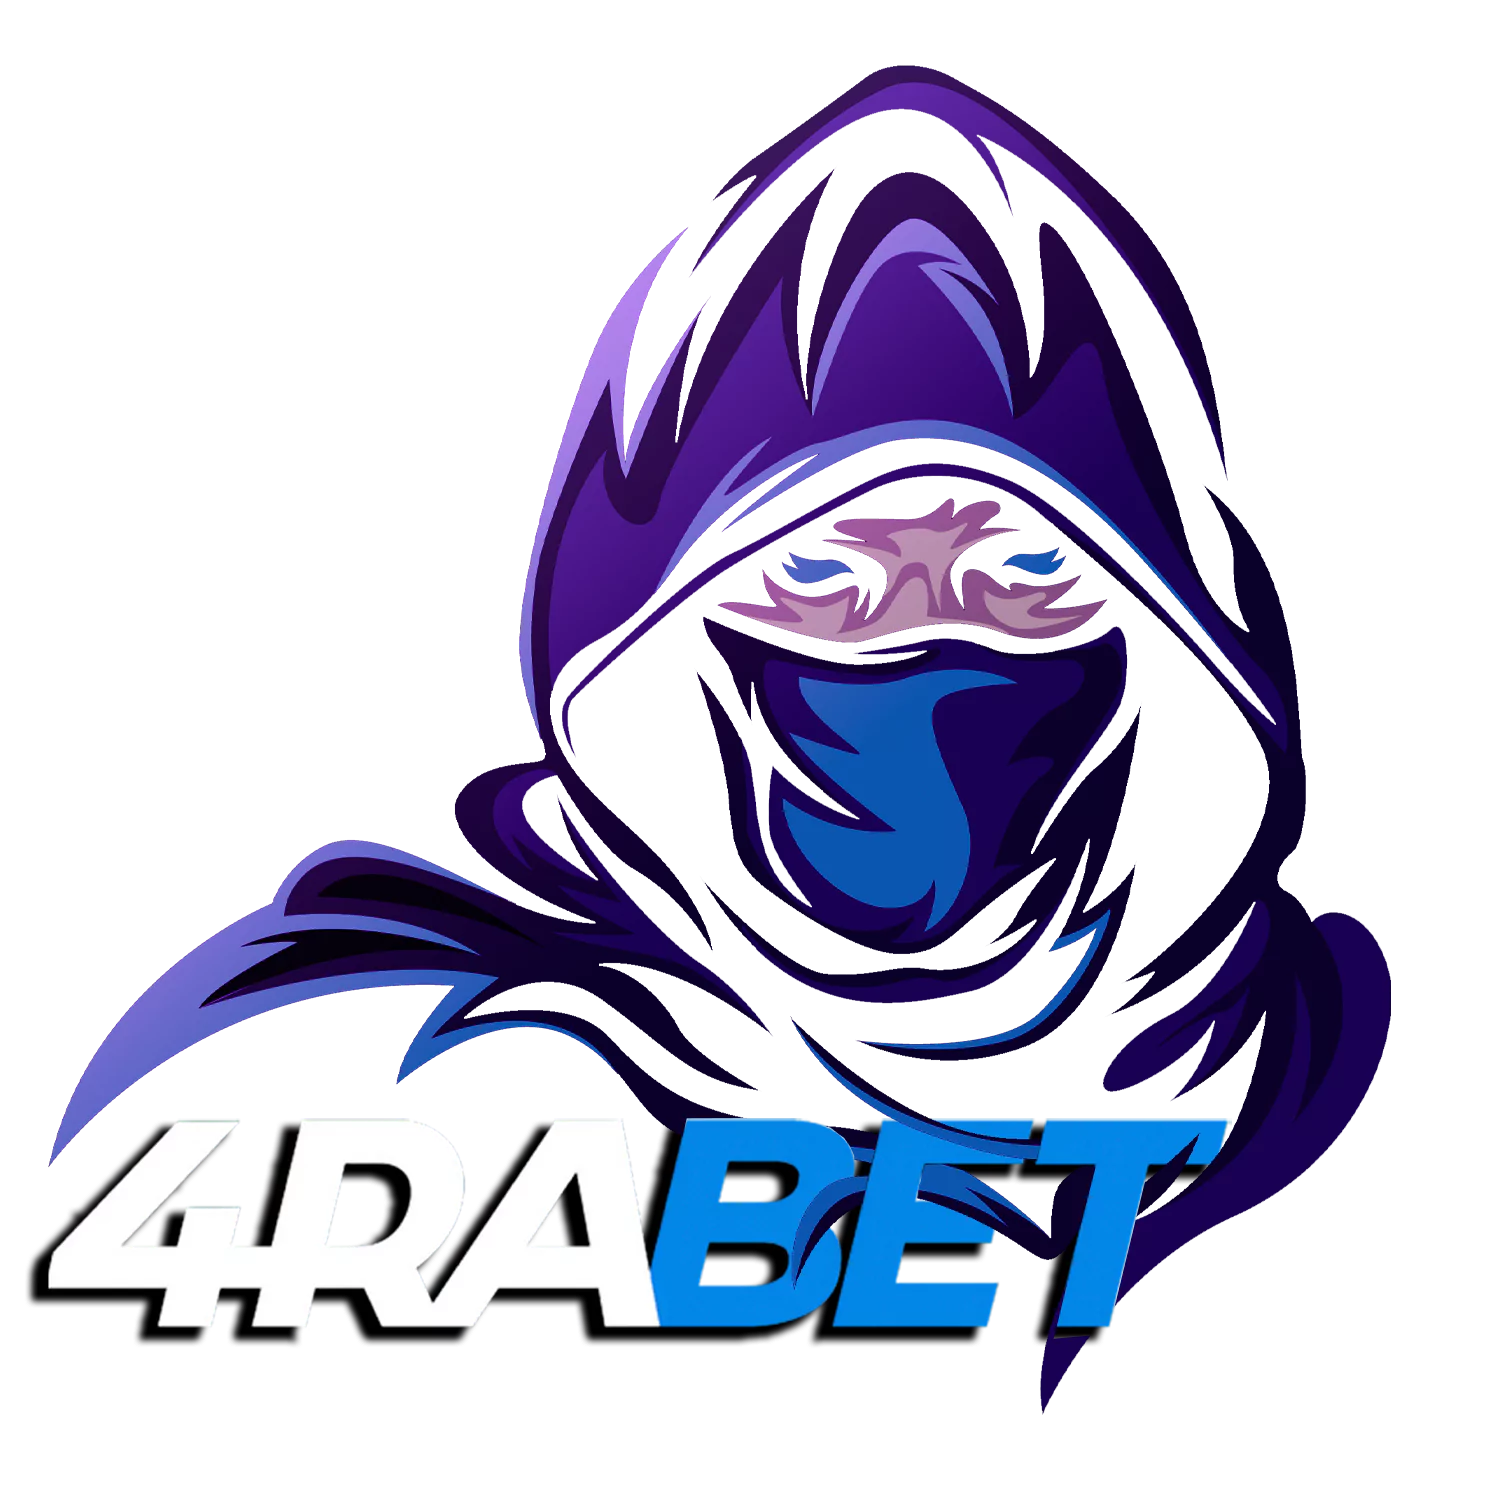 Learn how to sign up on the 4rabet site and place bets on Dota 2 events.